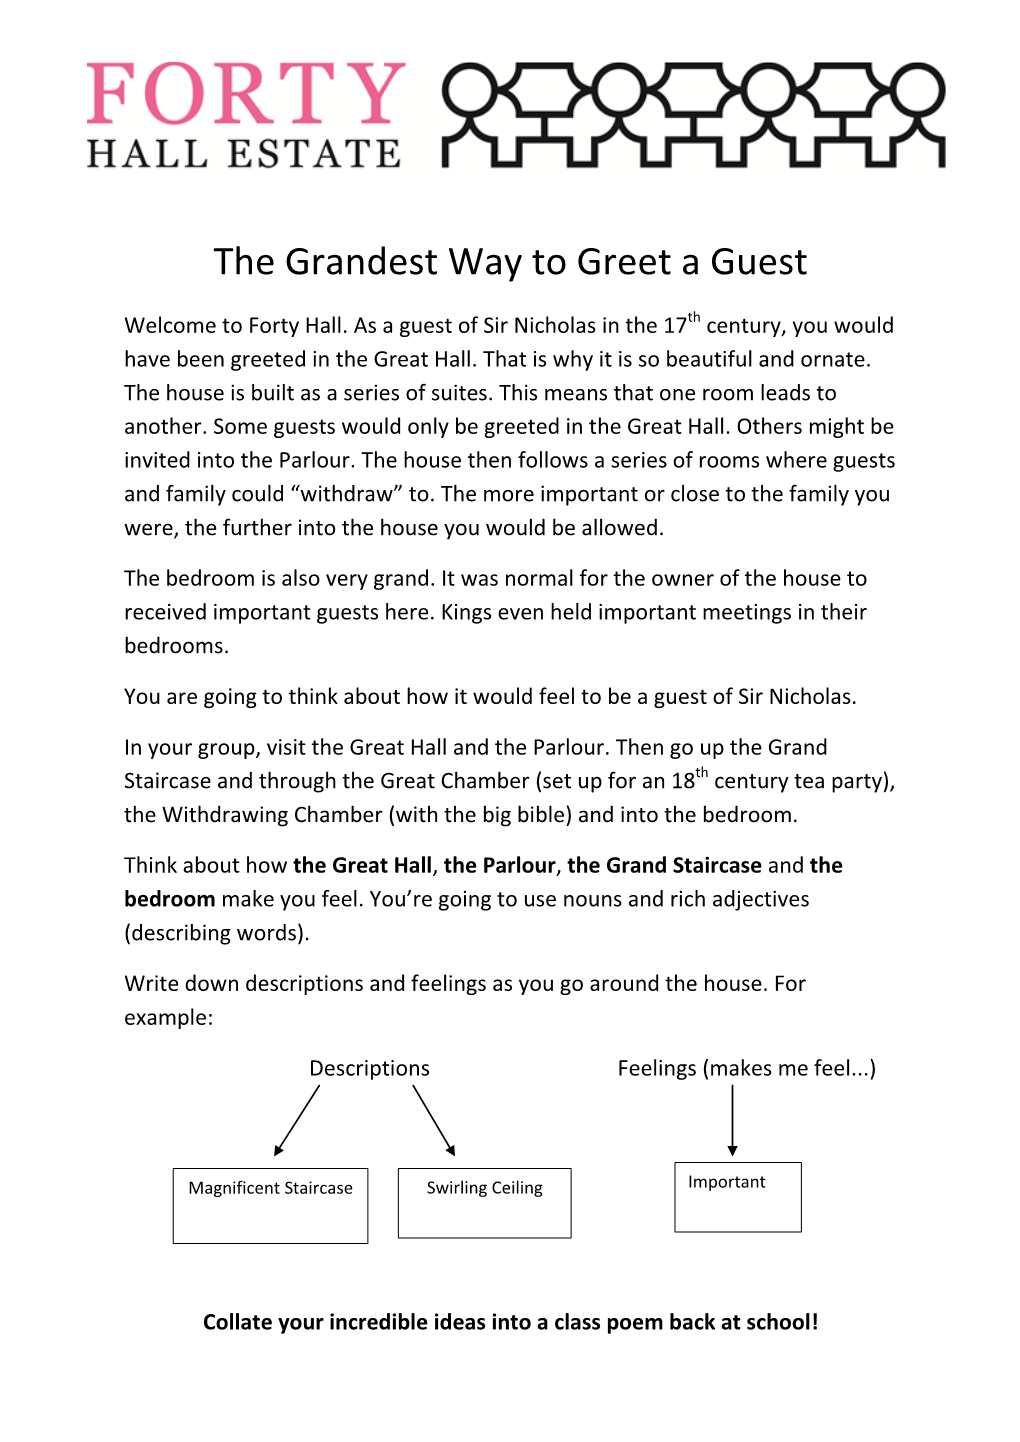 The Grandest Way to Greet a Guest